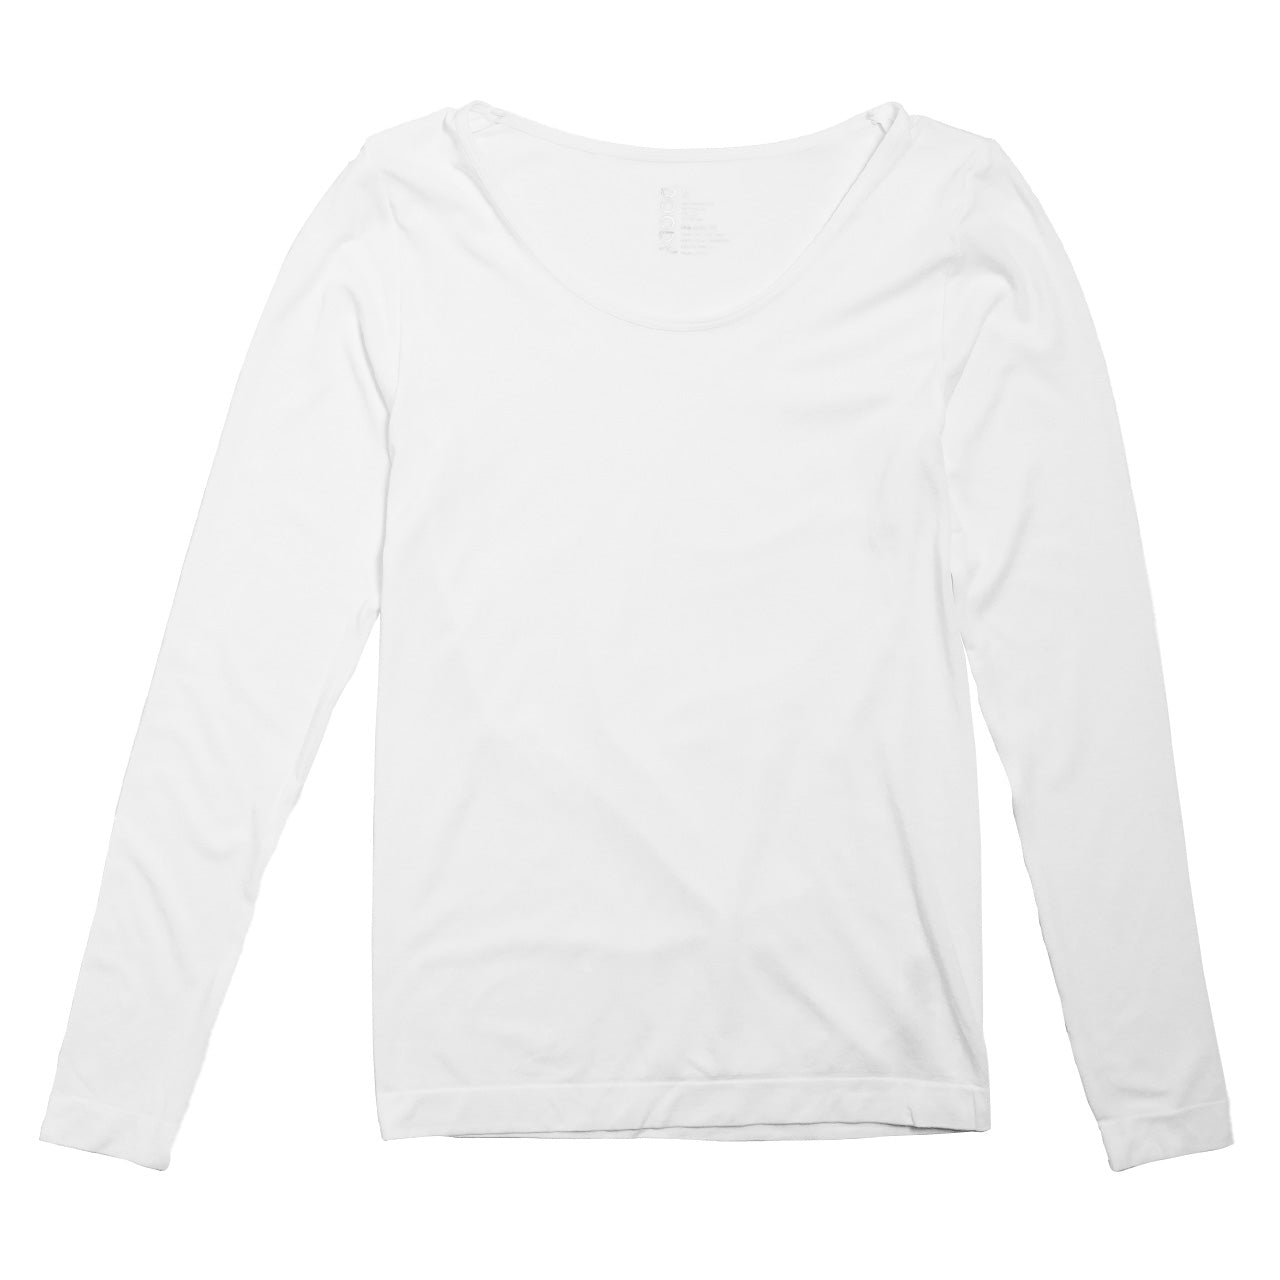 BOODY ブーディ ロング スリーブ トップ W's Long Sleeve Top Tシャツ カットソー